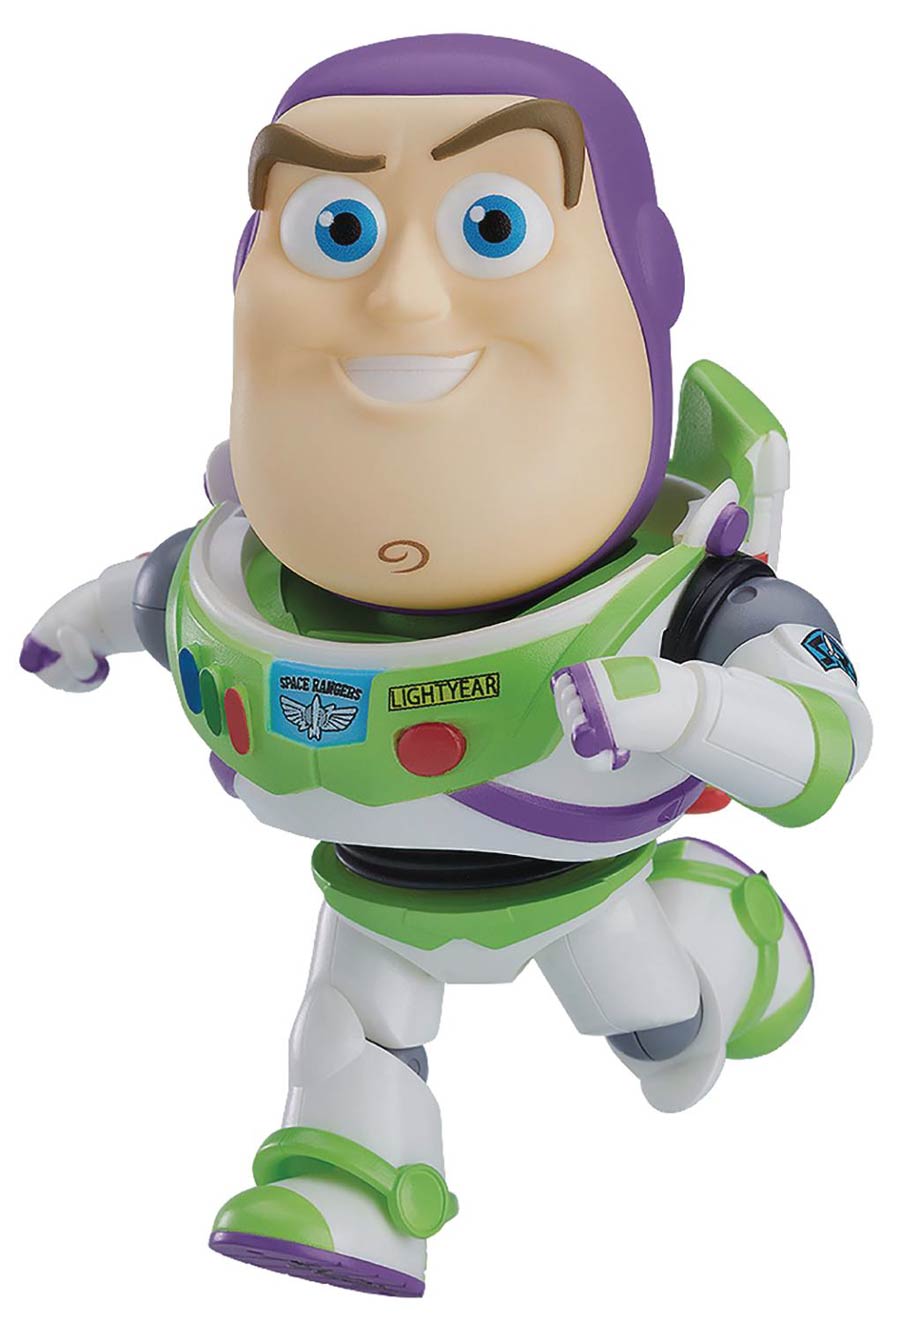 Toy Story Buzz Lightyear Nendoroid Deluxe